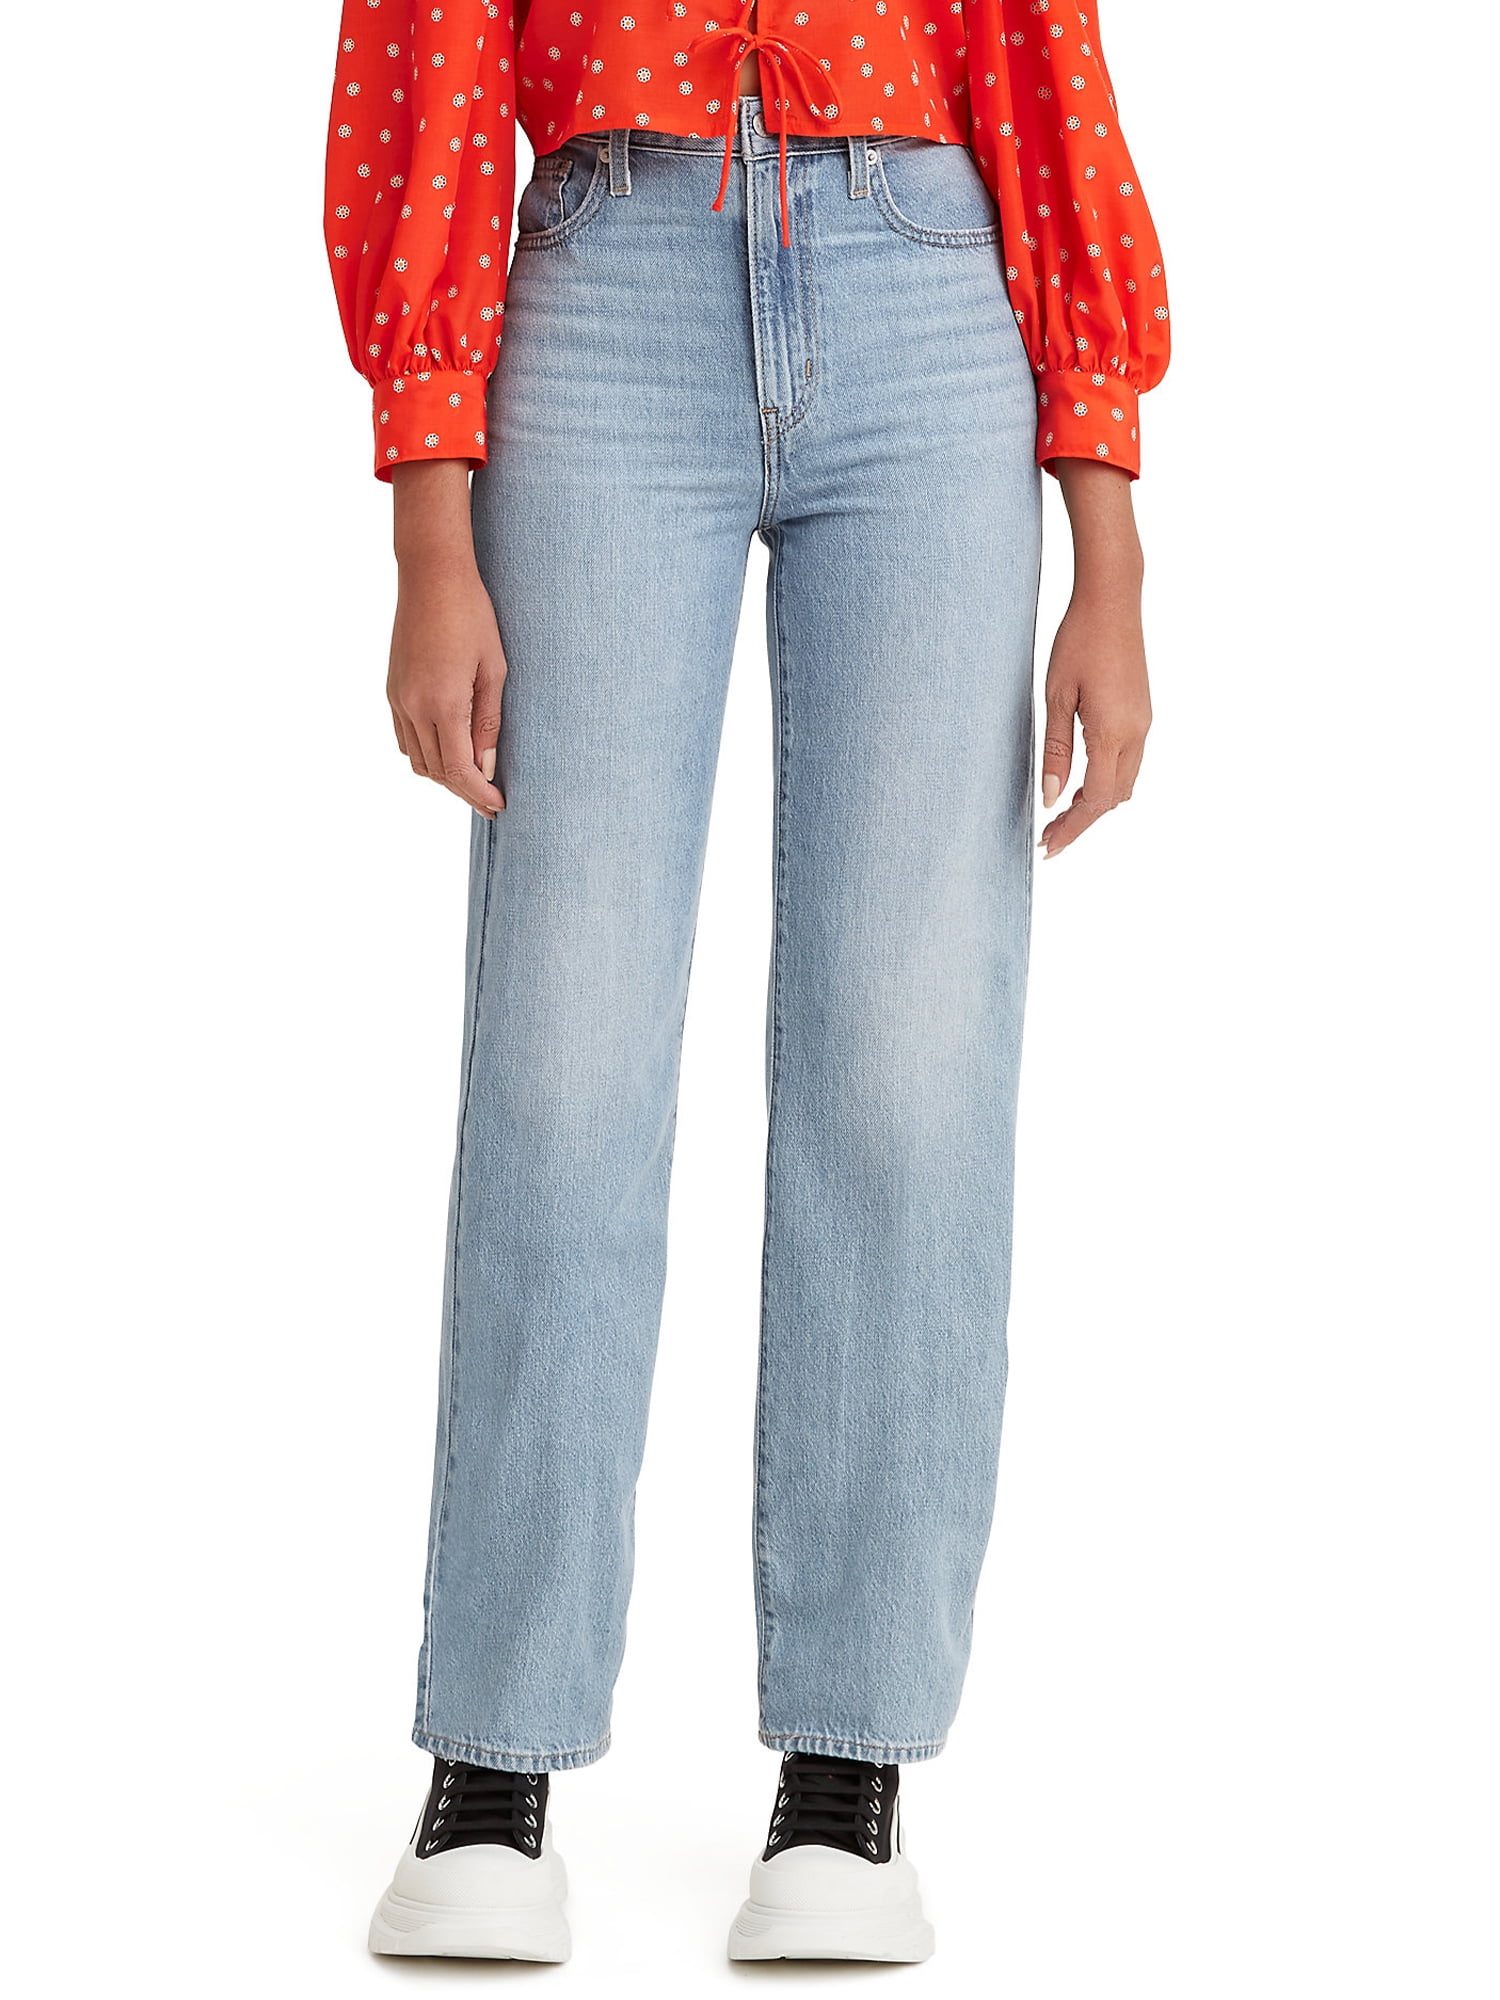 Levi's Women's High-Waisted Straight Jeans 